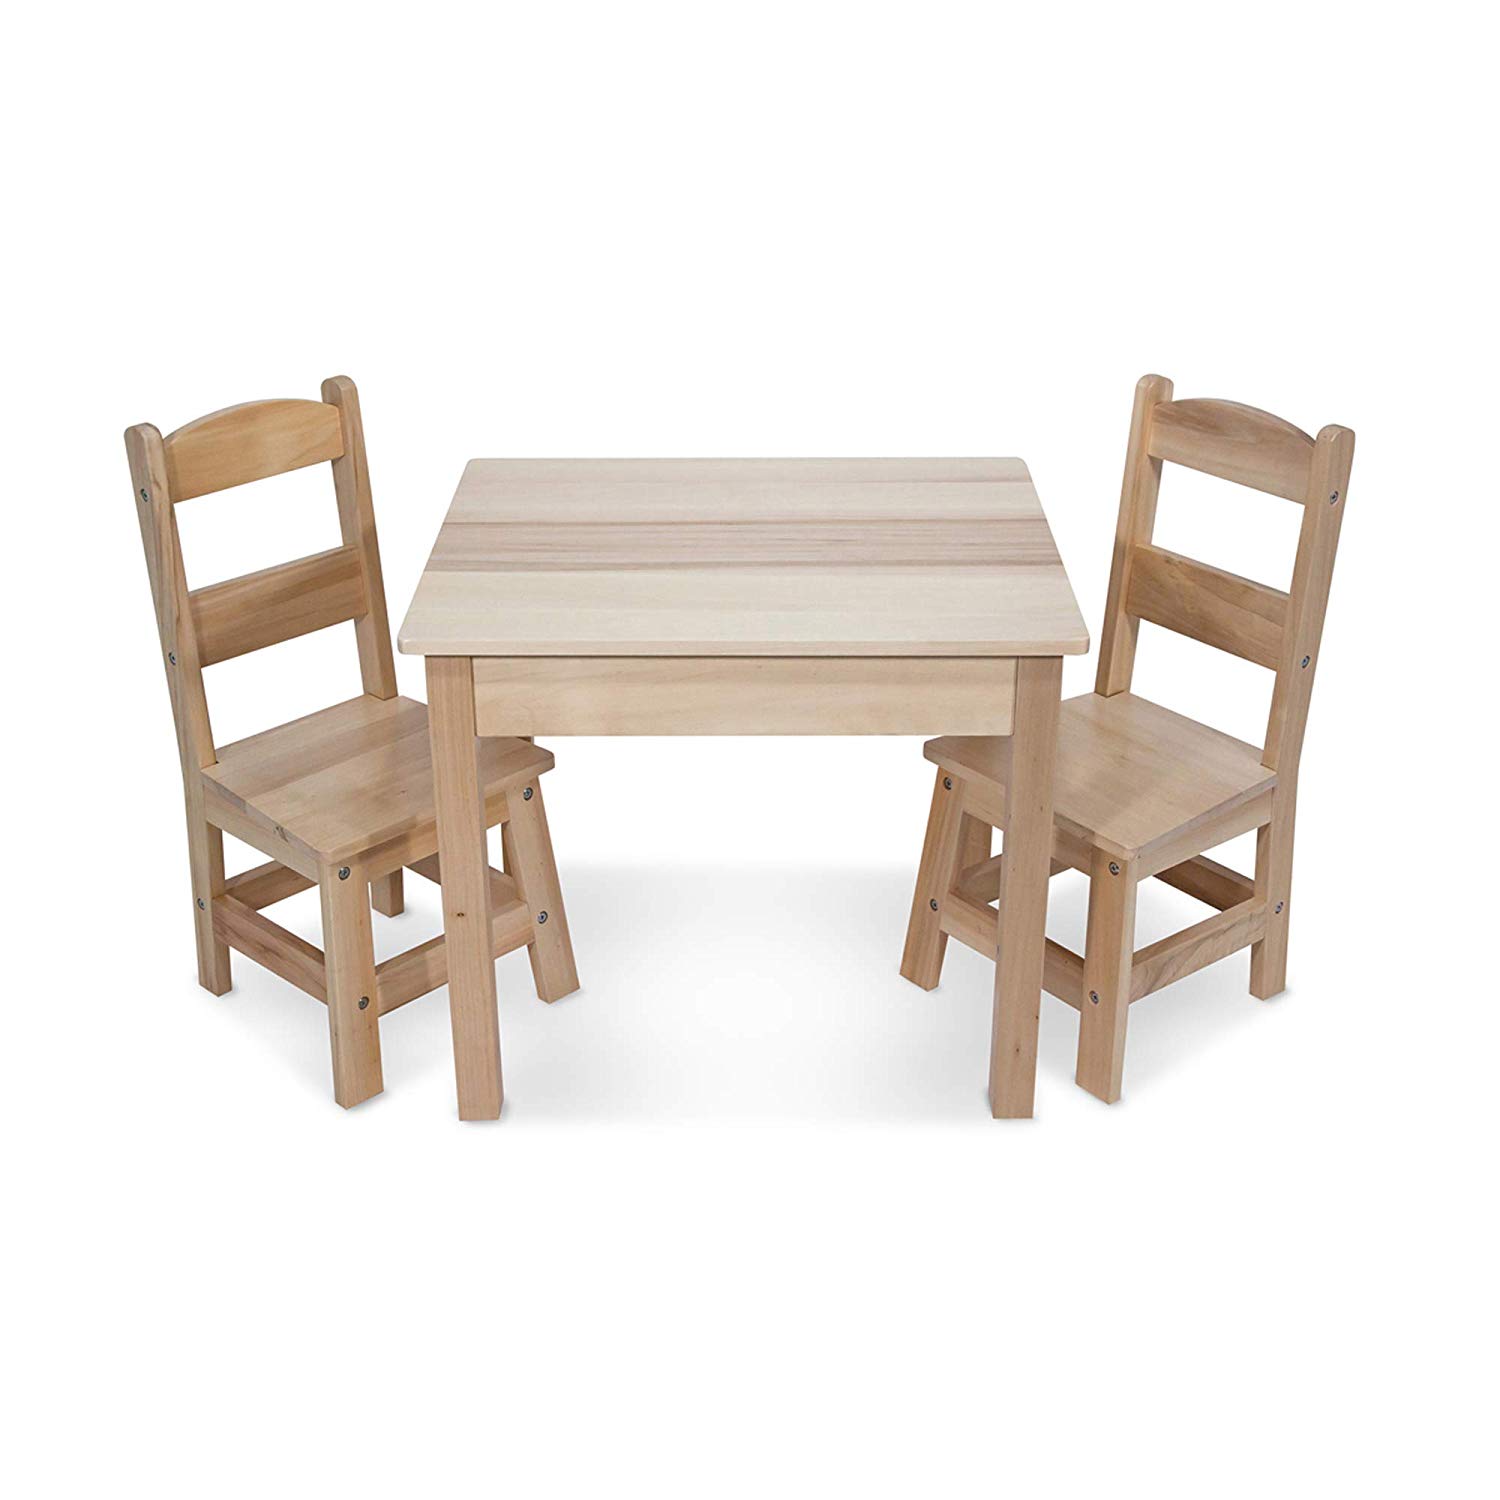 Solid Wood Kids Table and Chairs Set Includes Table/2 Chairs (3 Pieces)